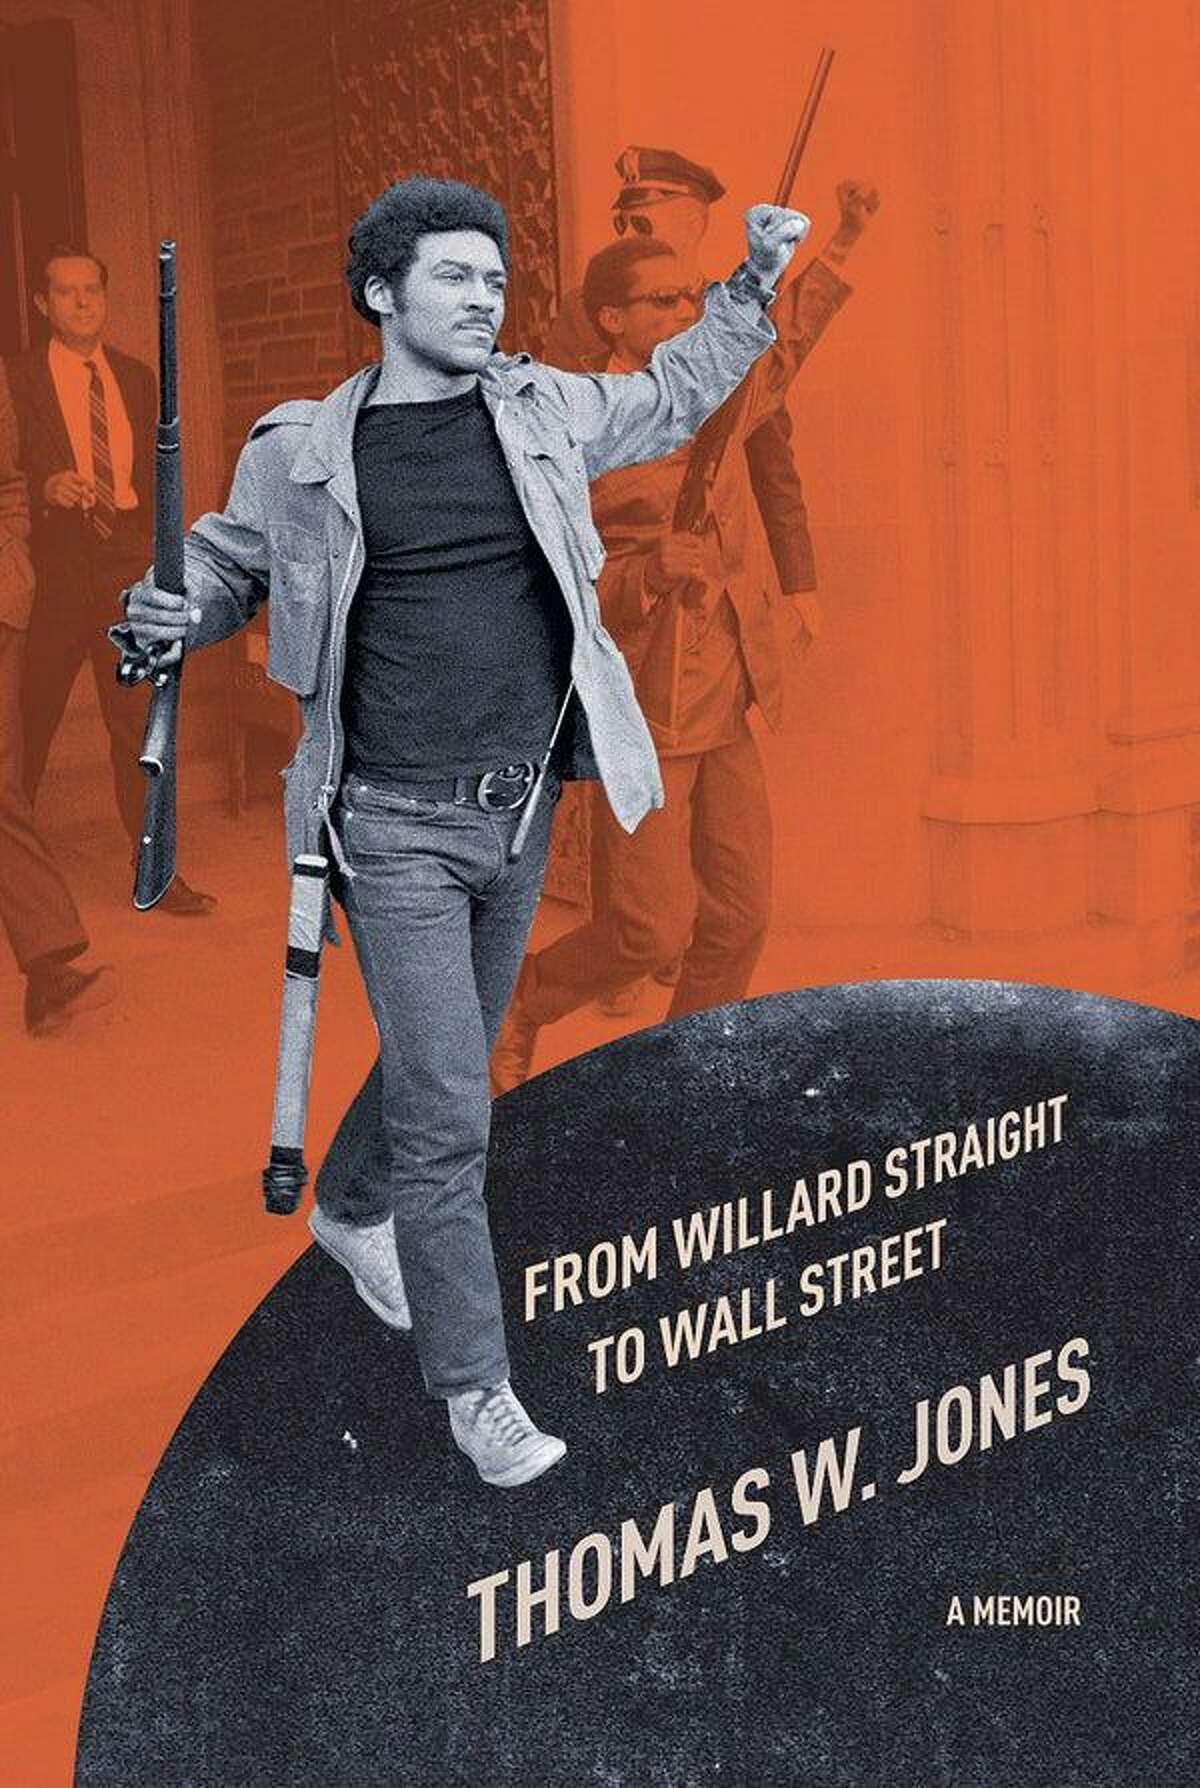 Author Thomas W. Jones will talk about his new book, “From Willard Straight to Wall Street,” on November 18 at Stamford’s Ferguson Library.